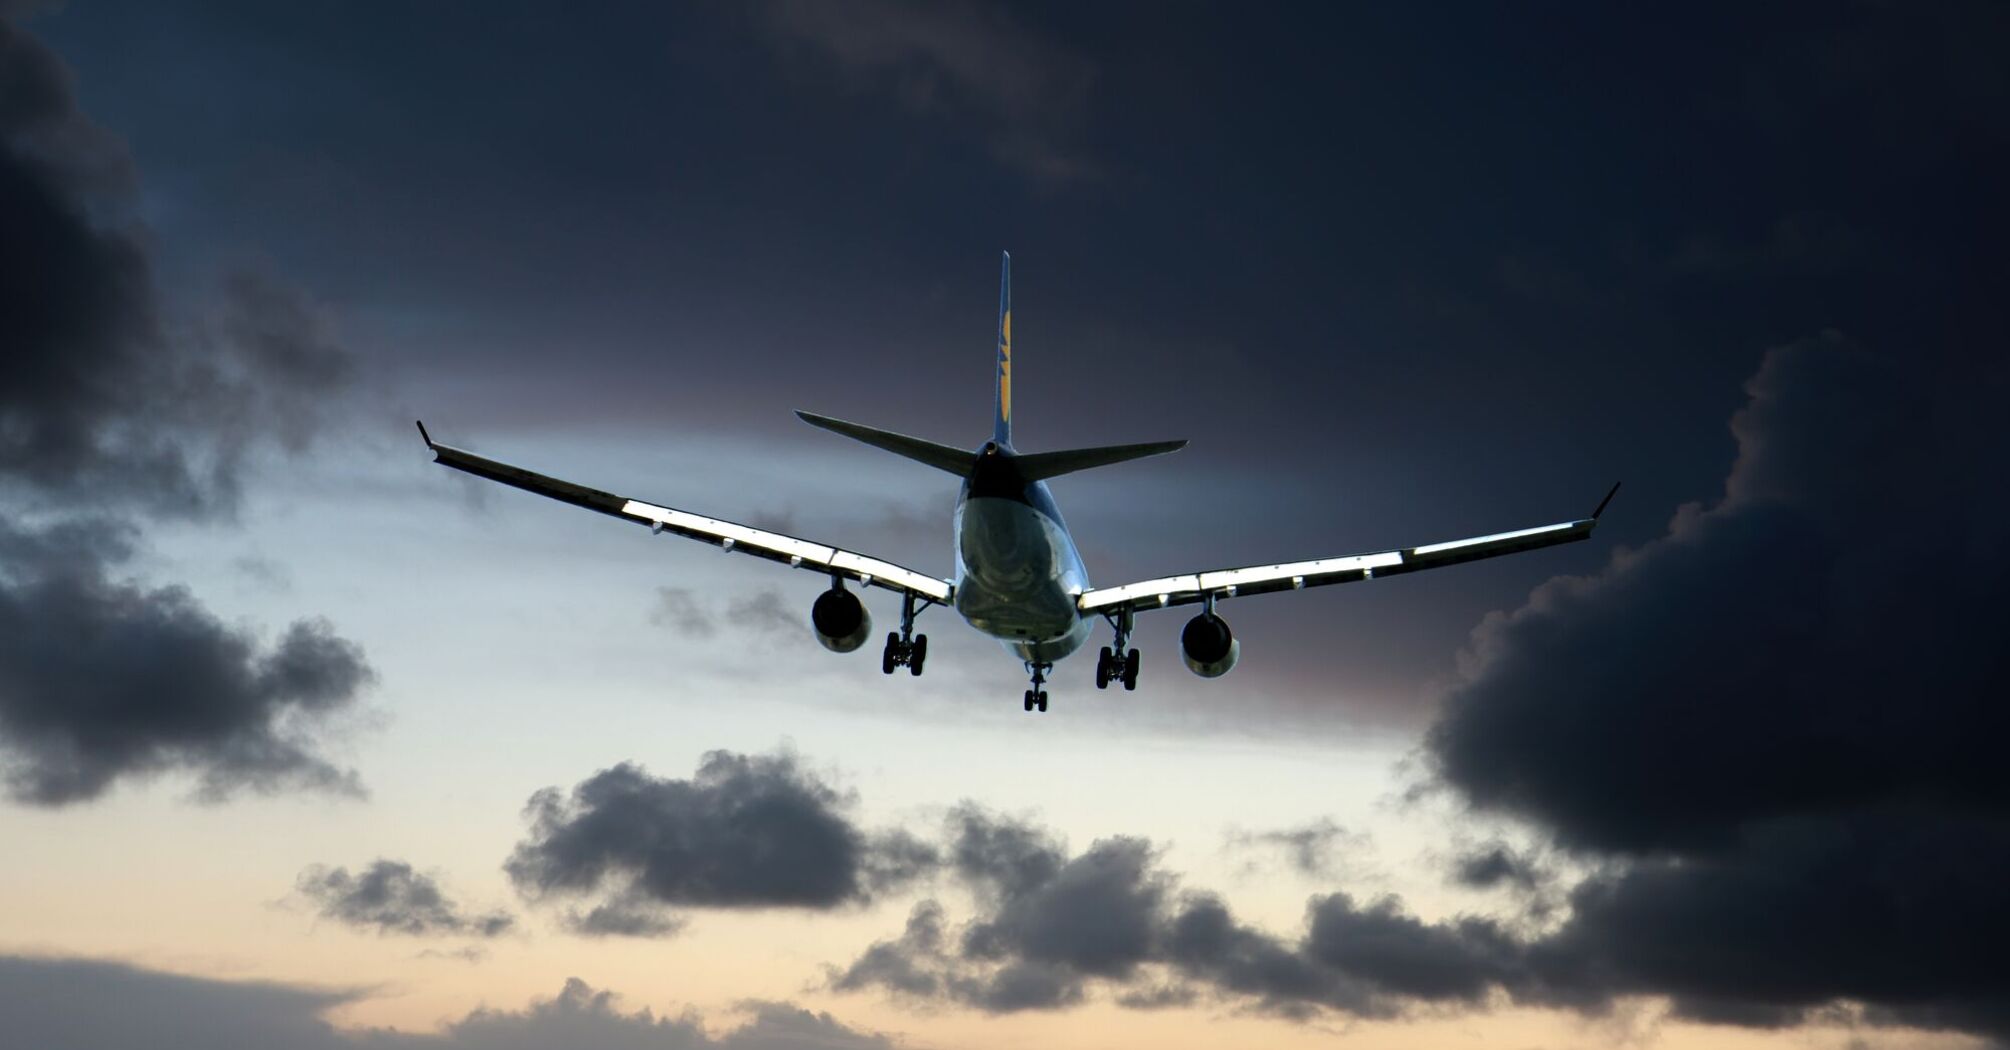 2023 named one of the safest years in the history of aviation